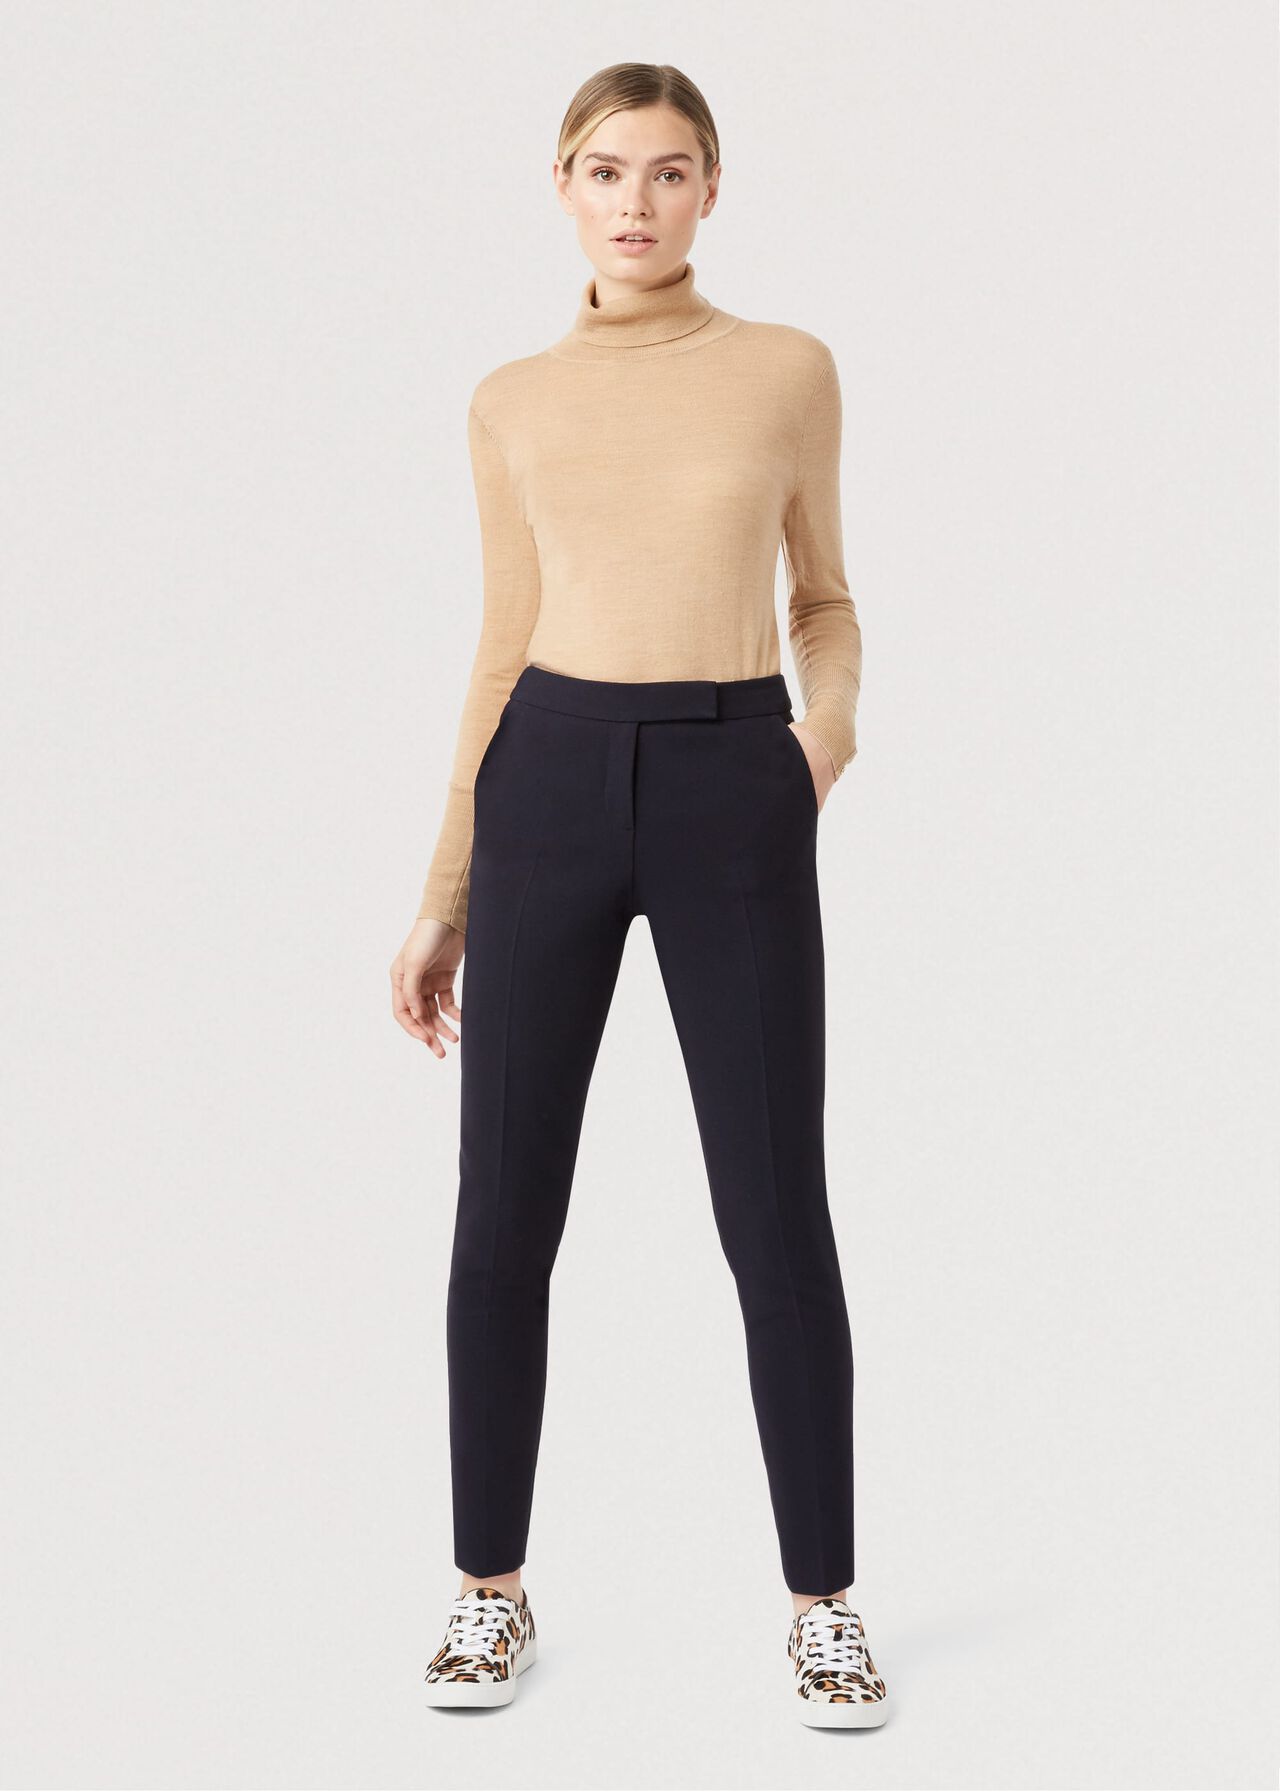 Petite Leila Slim trousers With Stretch, Navy, hi-res